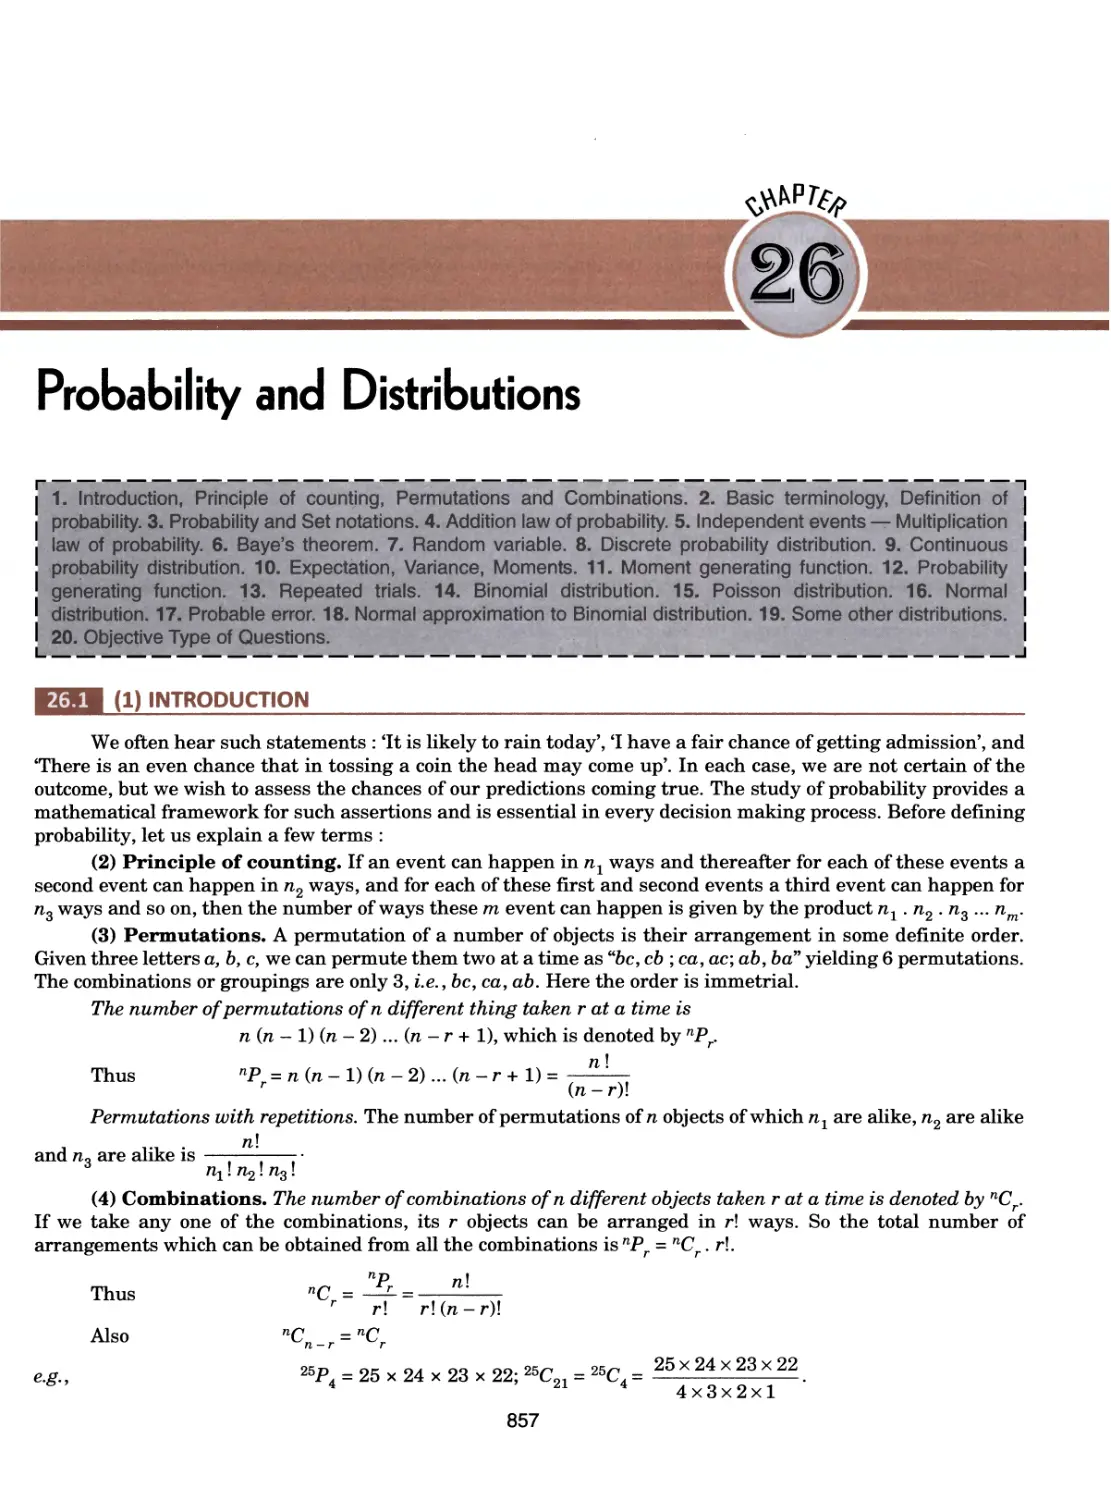 26.Probability and Distributions 857